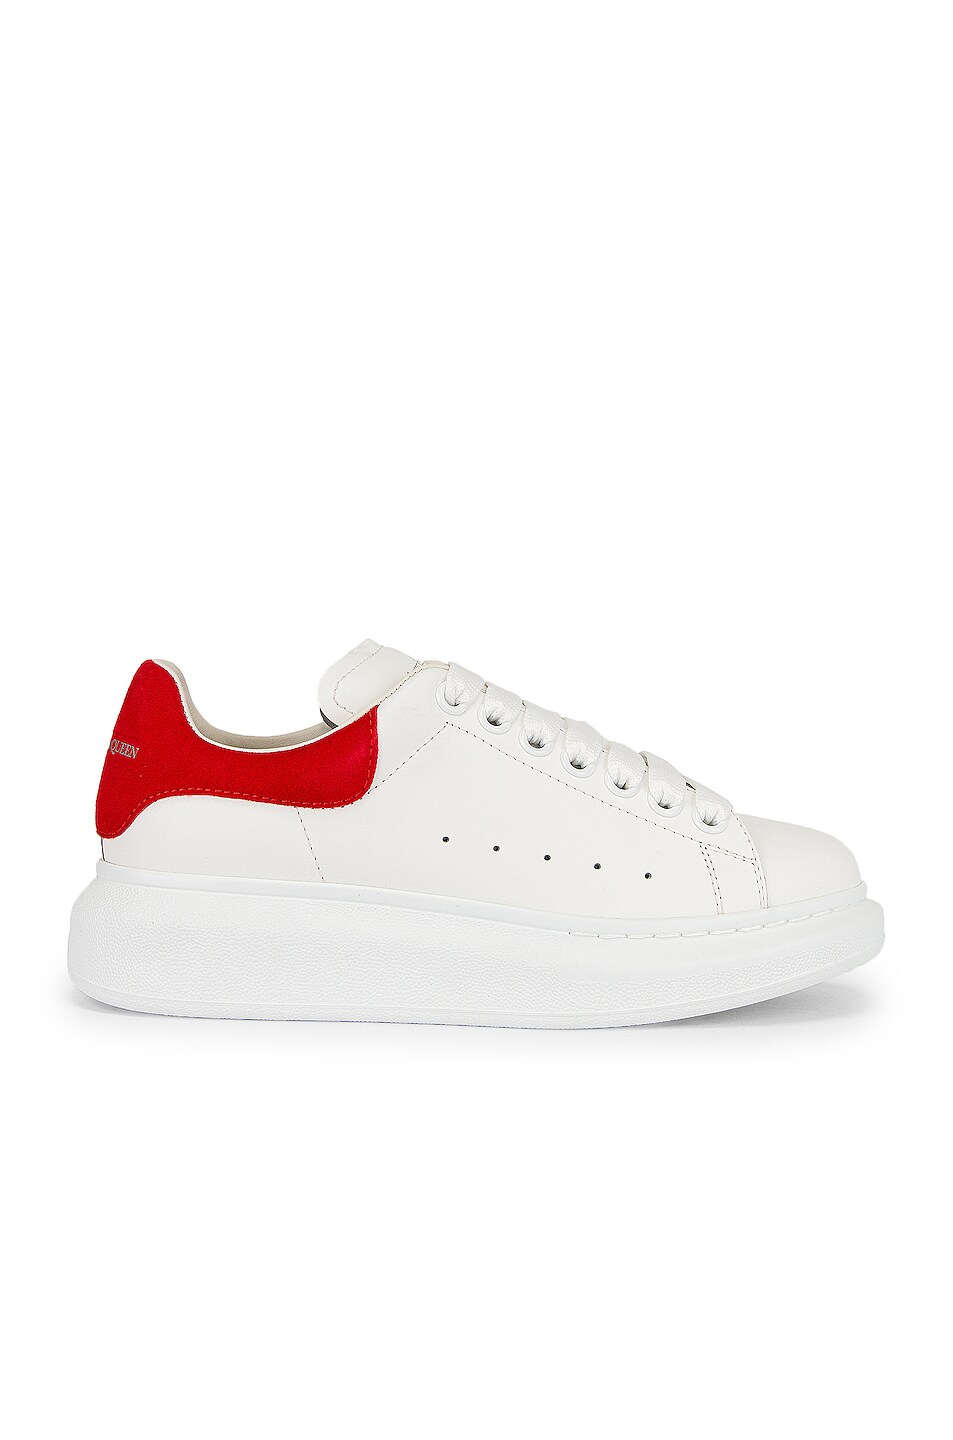 Image 1 of Alexander McQueen Oversized Sneakers in White & Lust Red